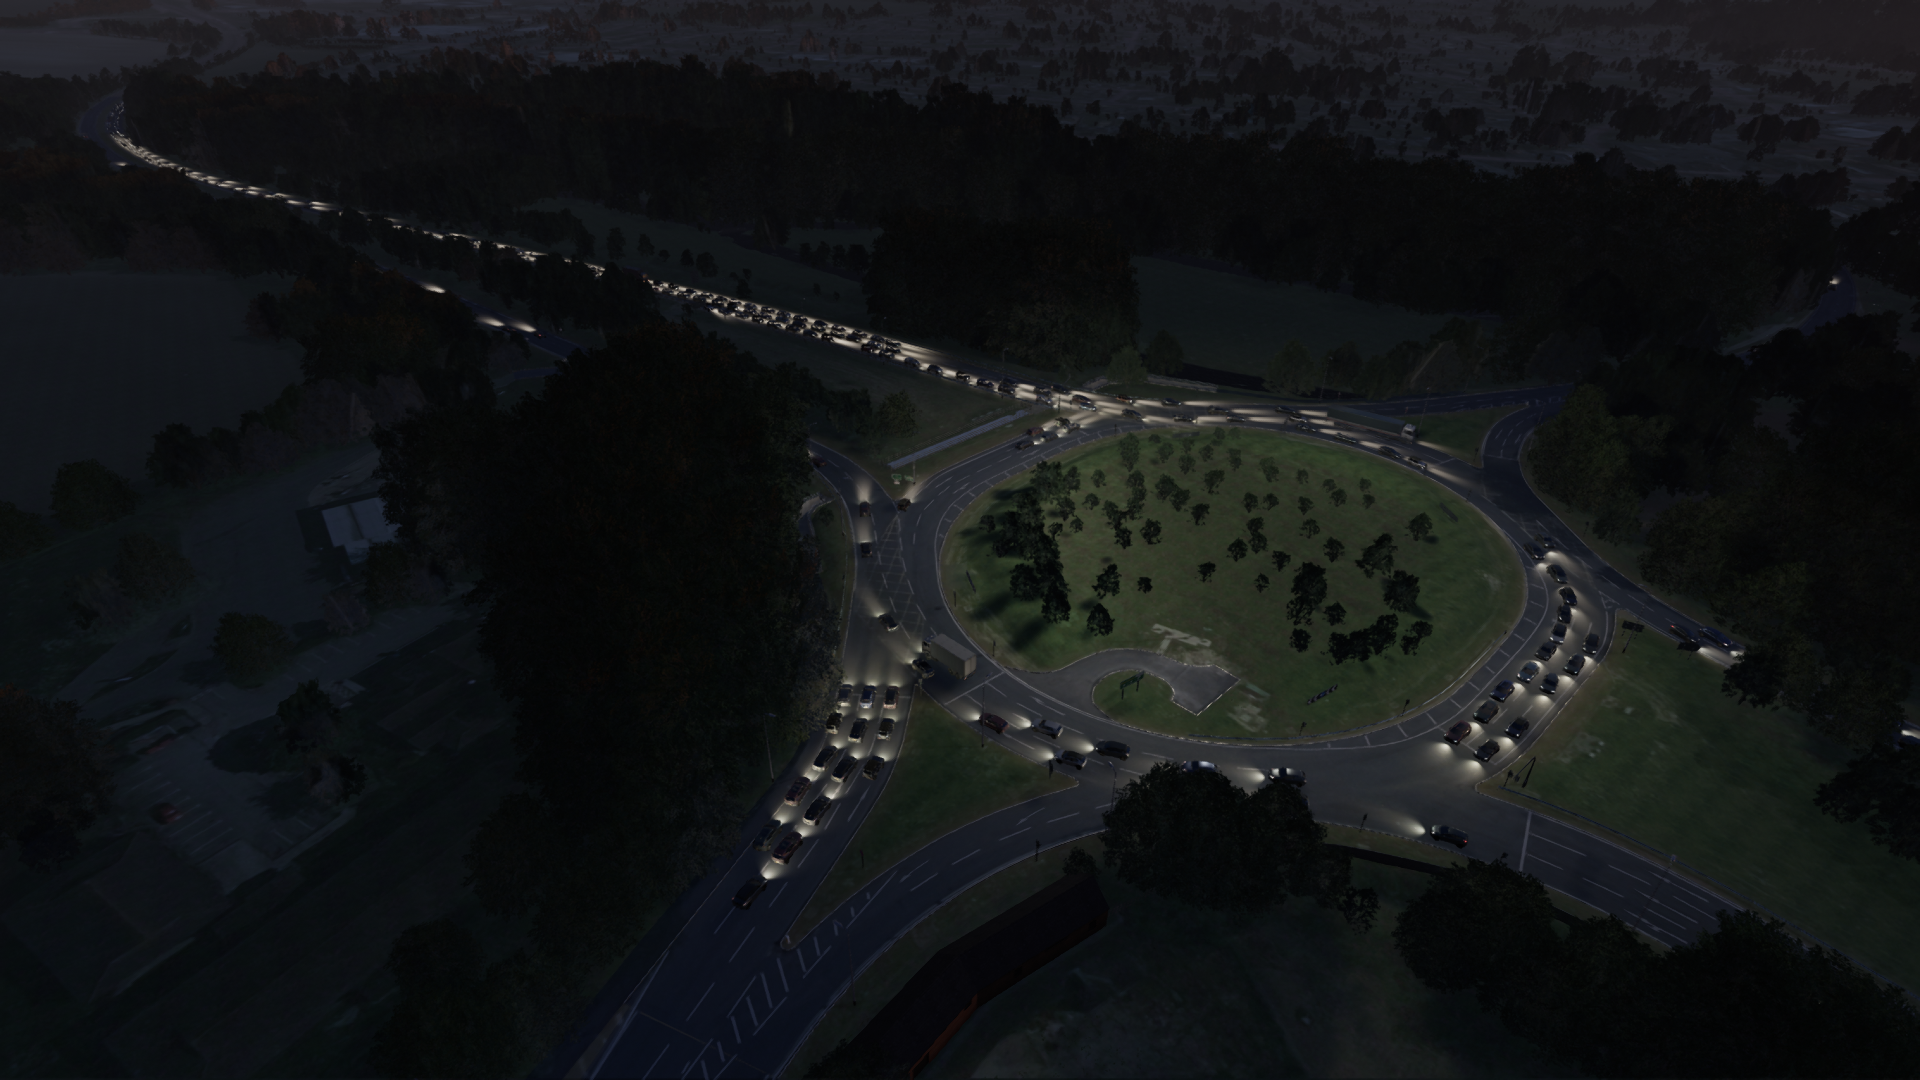 The Countess Roundabout at night.